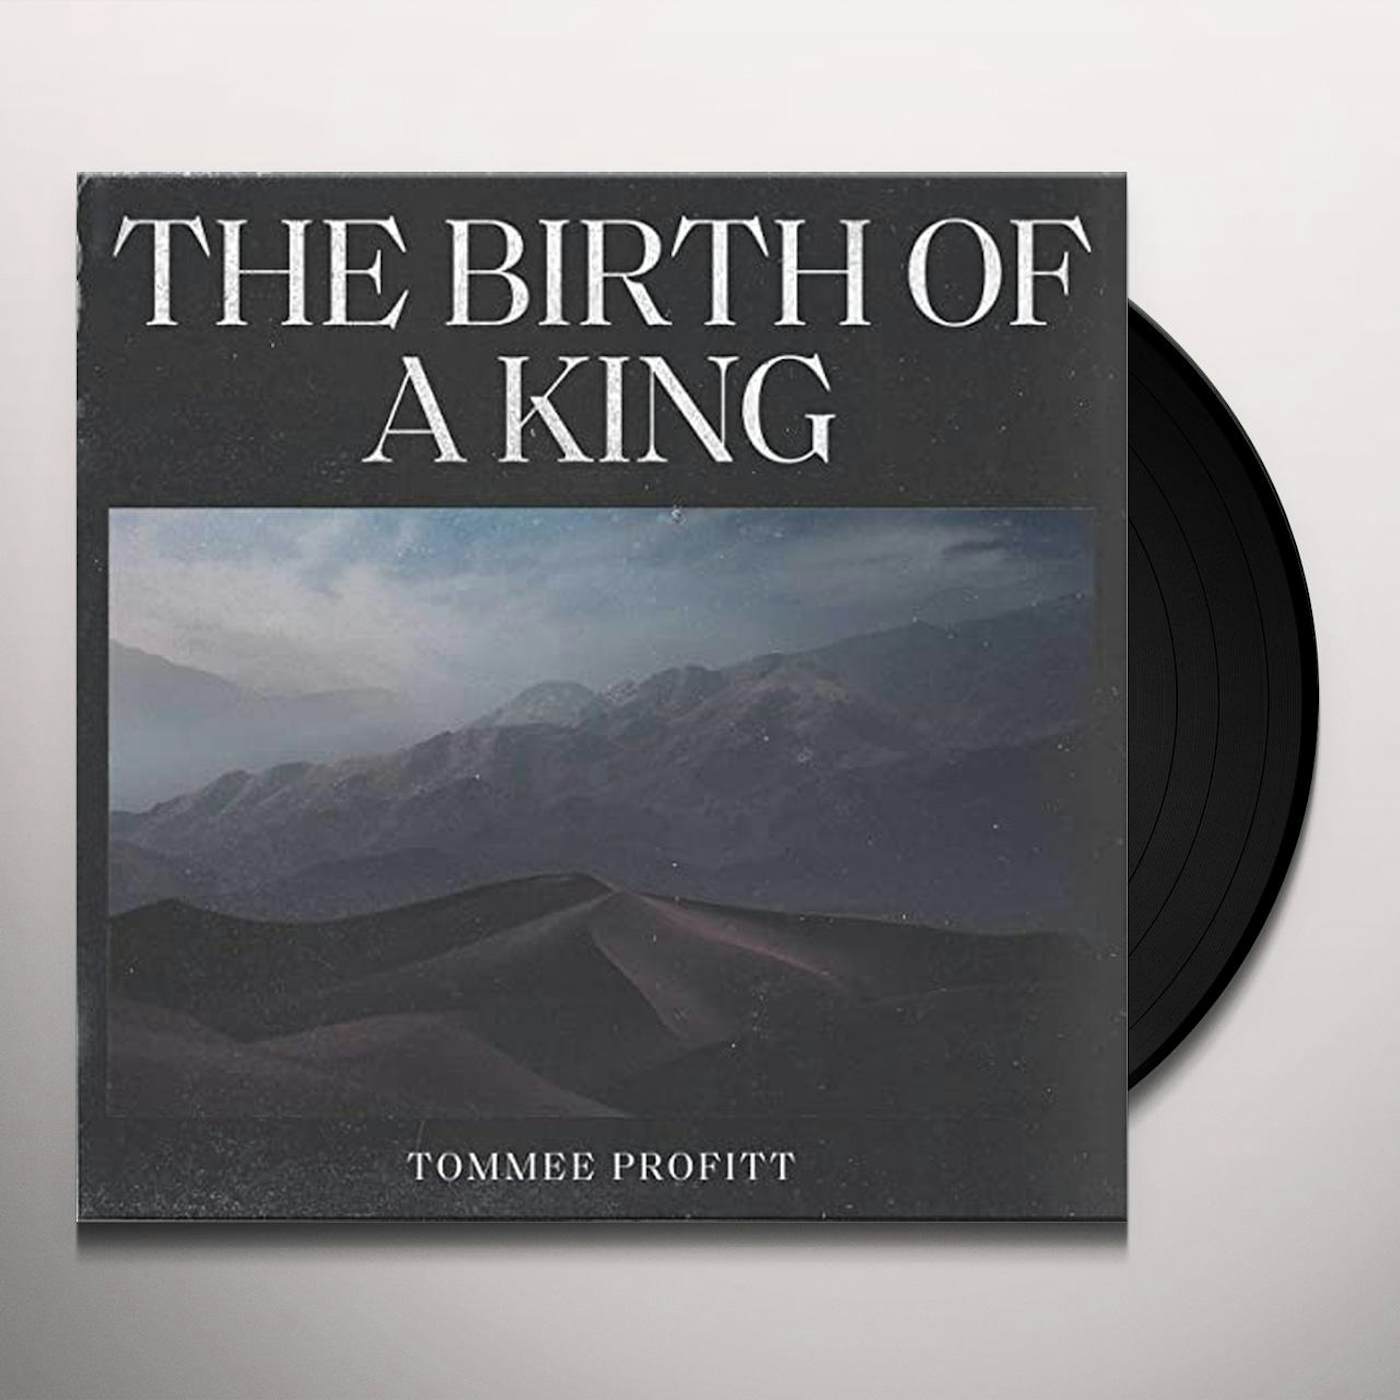 THE BIRTH OF A KING: LIVE IN CONCERT - Tommee Profitt 